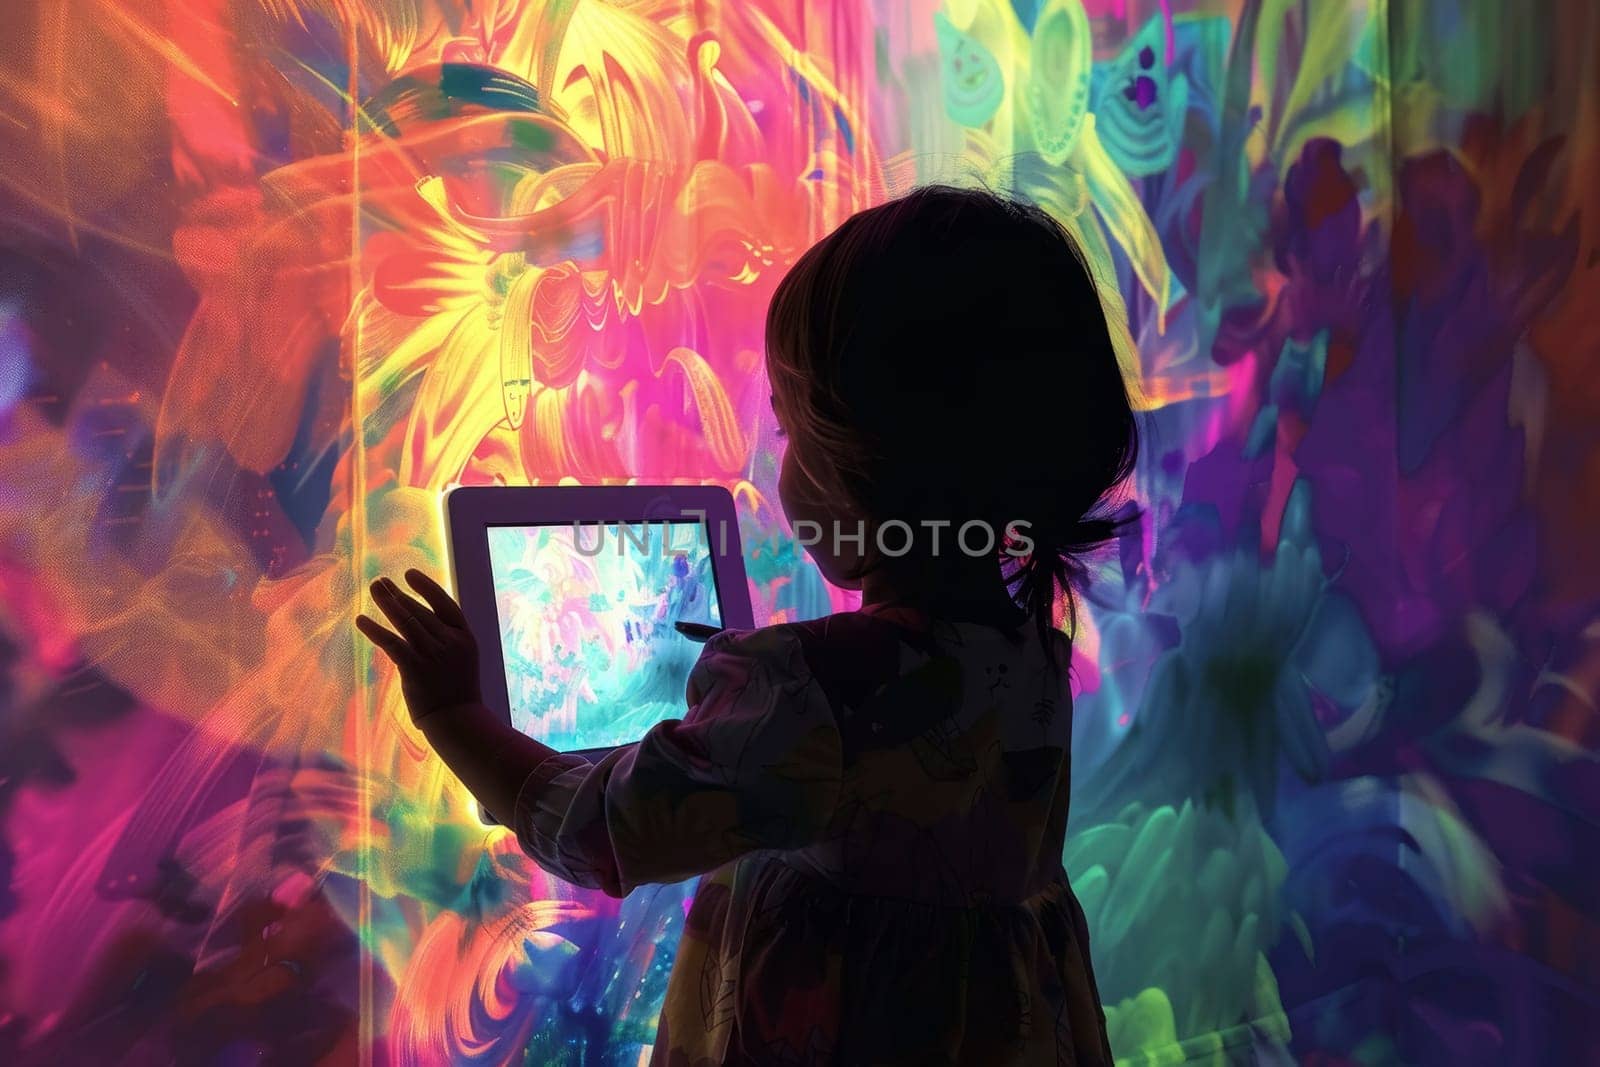 A young boy with autism is absorbed in a tactile sensory activity, using his hands to explore and create. The vibrant colors highlight the sensory stimulation and learning experience